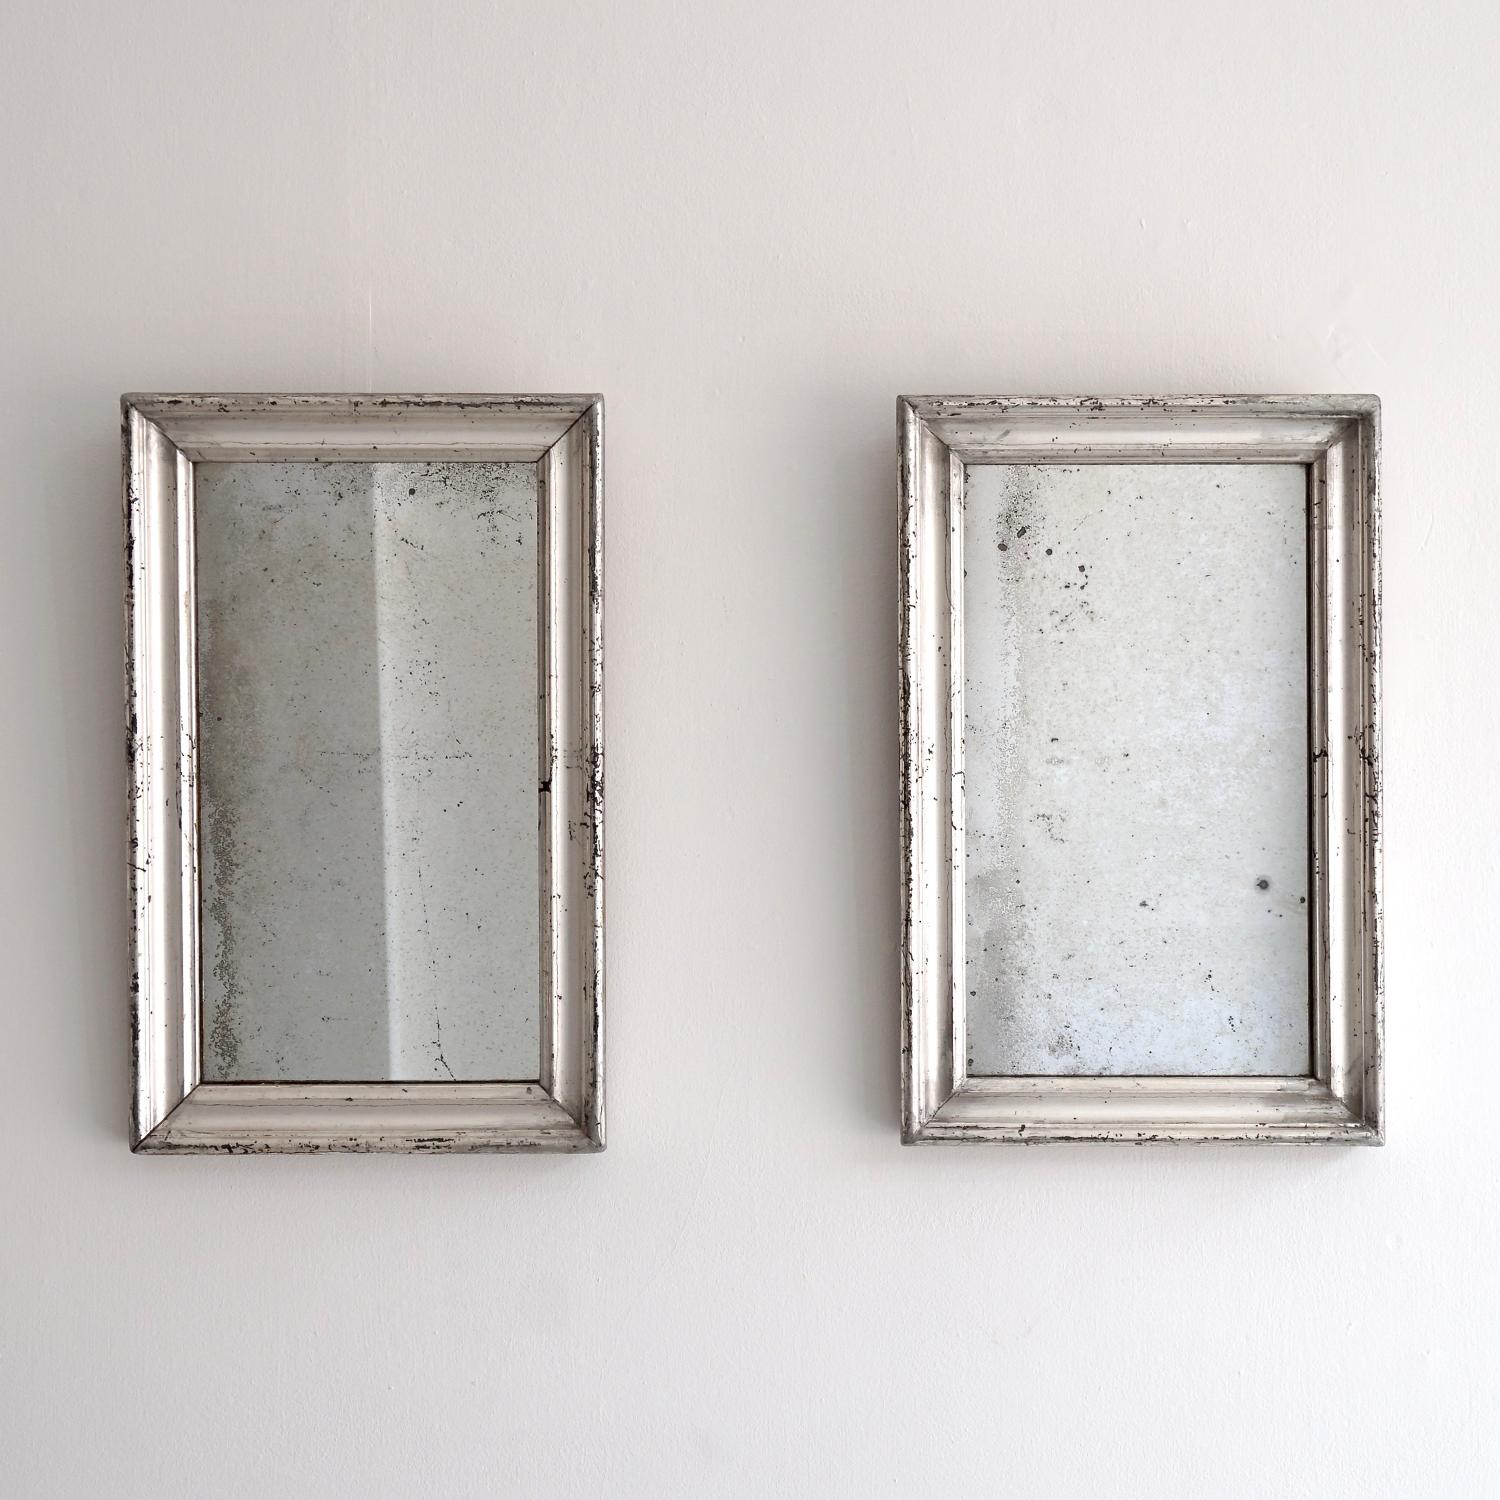 Beautiful Pair Of Silver Mercury Glass Mirrors In Mirrors